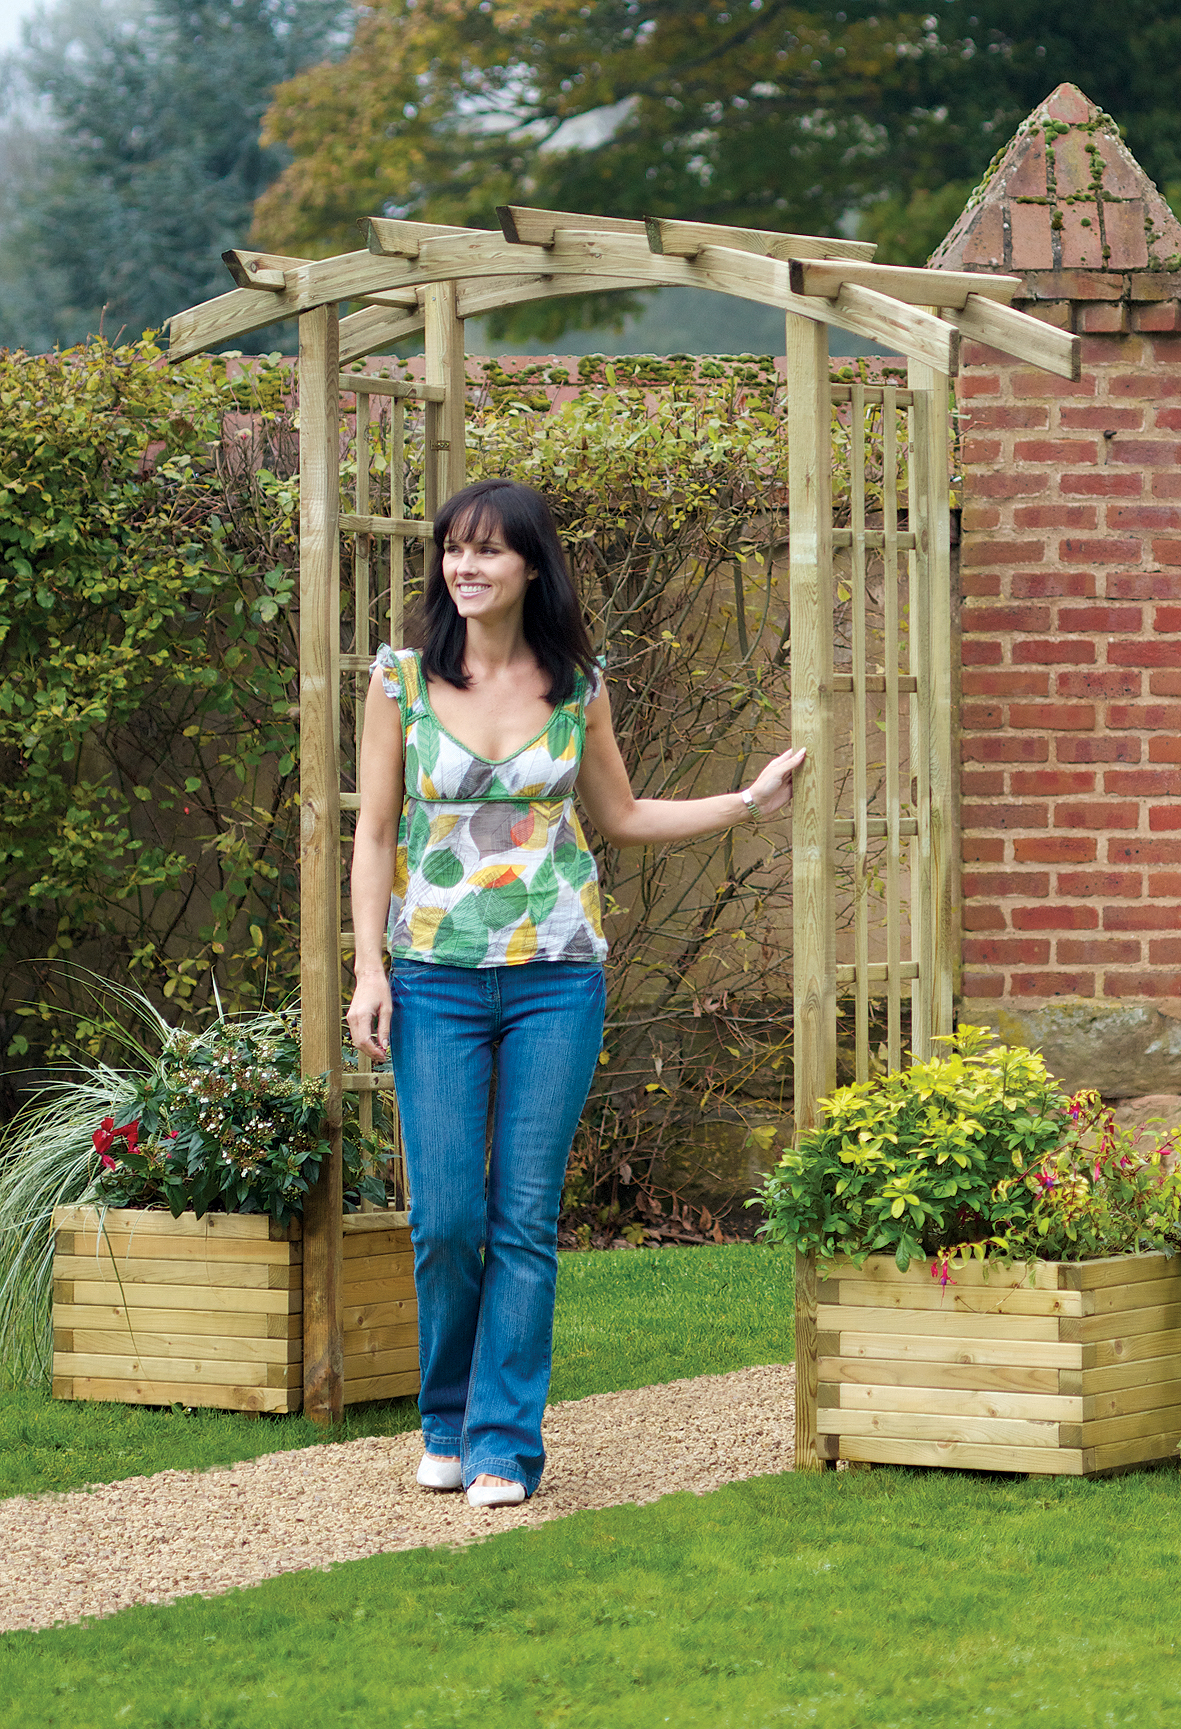 The Bow Top Garden Arch comes with decorative square trellis sides enhancing any garden space. The structure is ideal for creating an impressionable pathway, or as a decorative garden feature. The timber is pressure treated for enhanced protection.